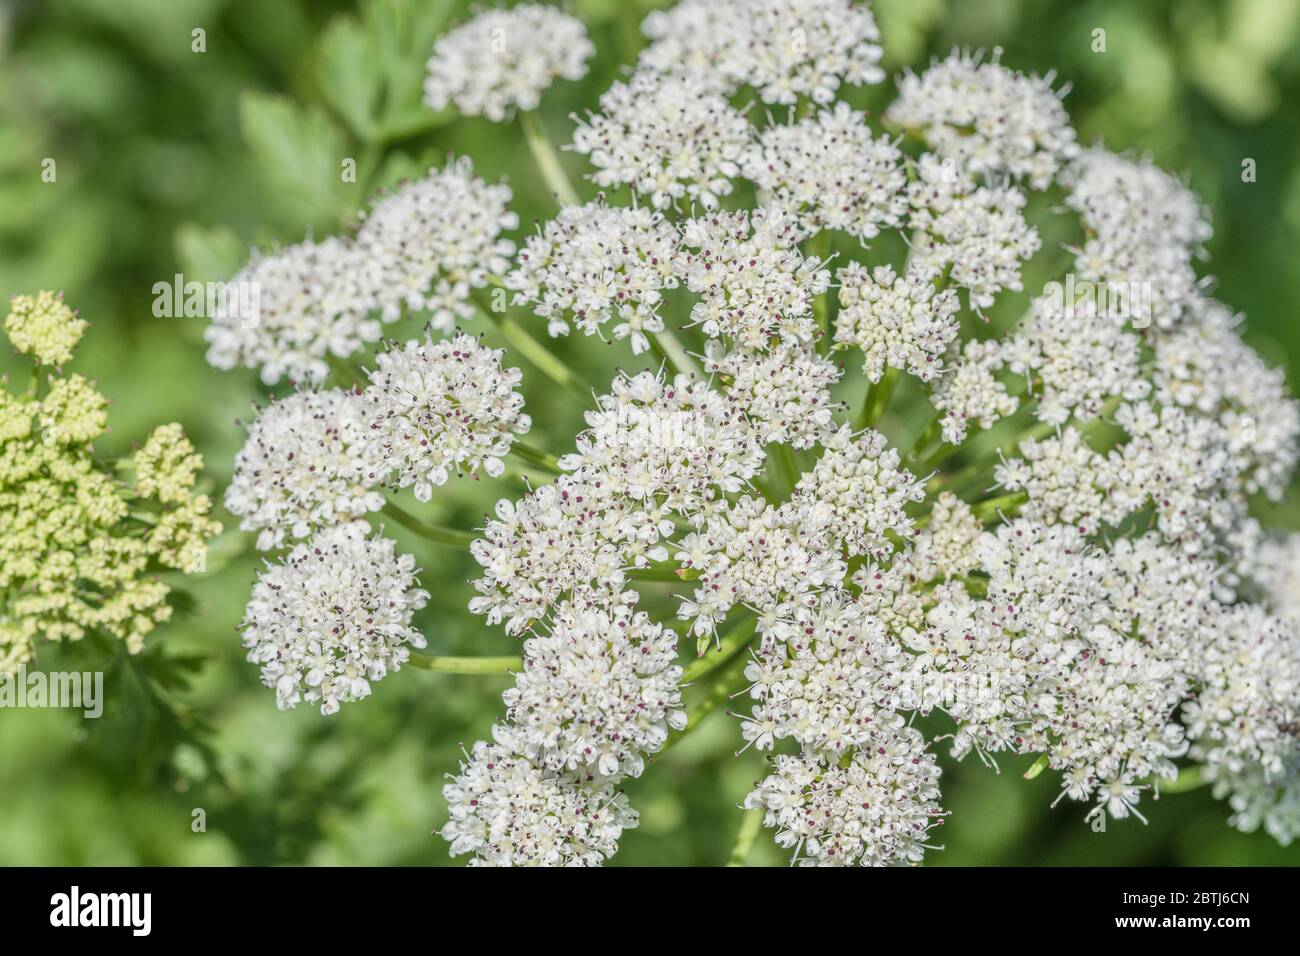 White flower head / flowers of the poisonous umbellifer Hemlock Water Dropwort / Oenanthe crocata in sunlight. One of UK's most poisonous plants. Stock Photo